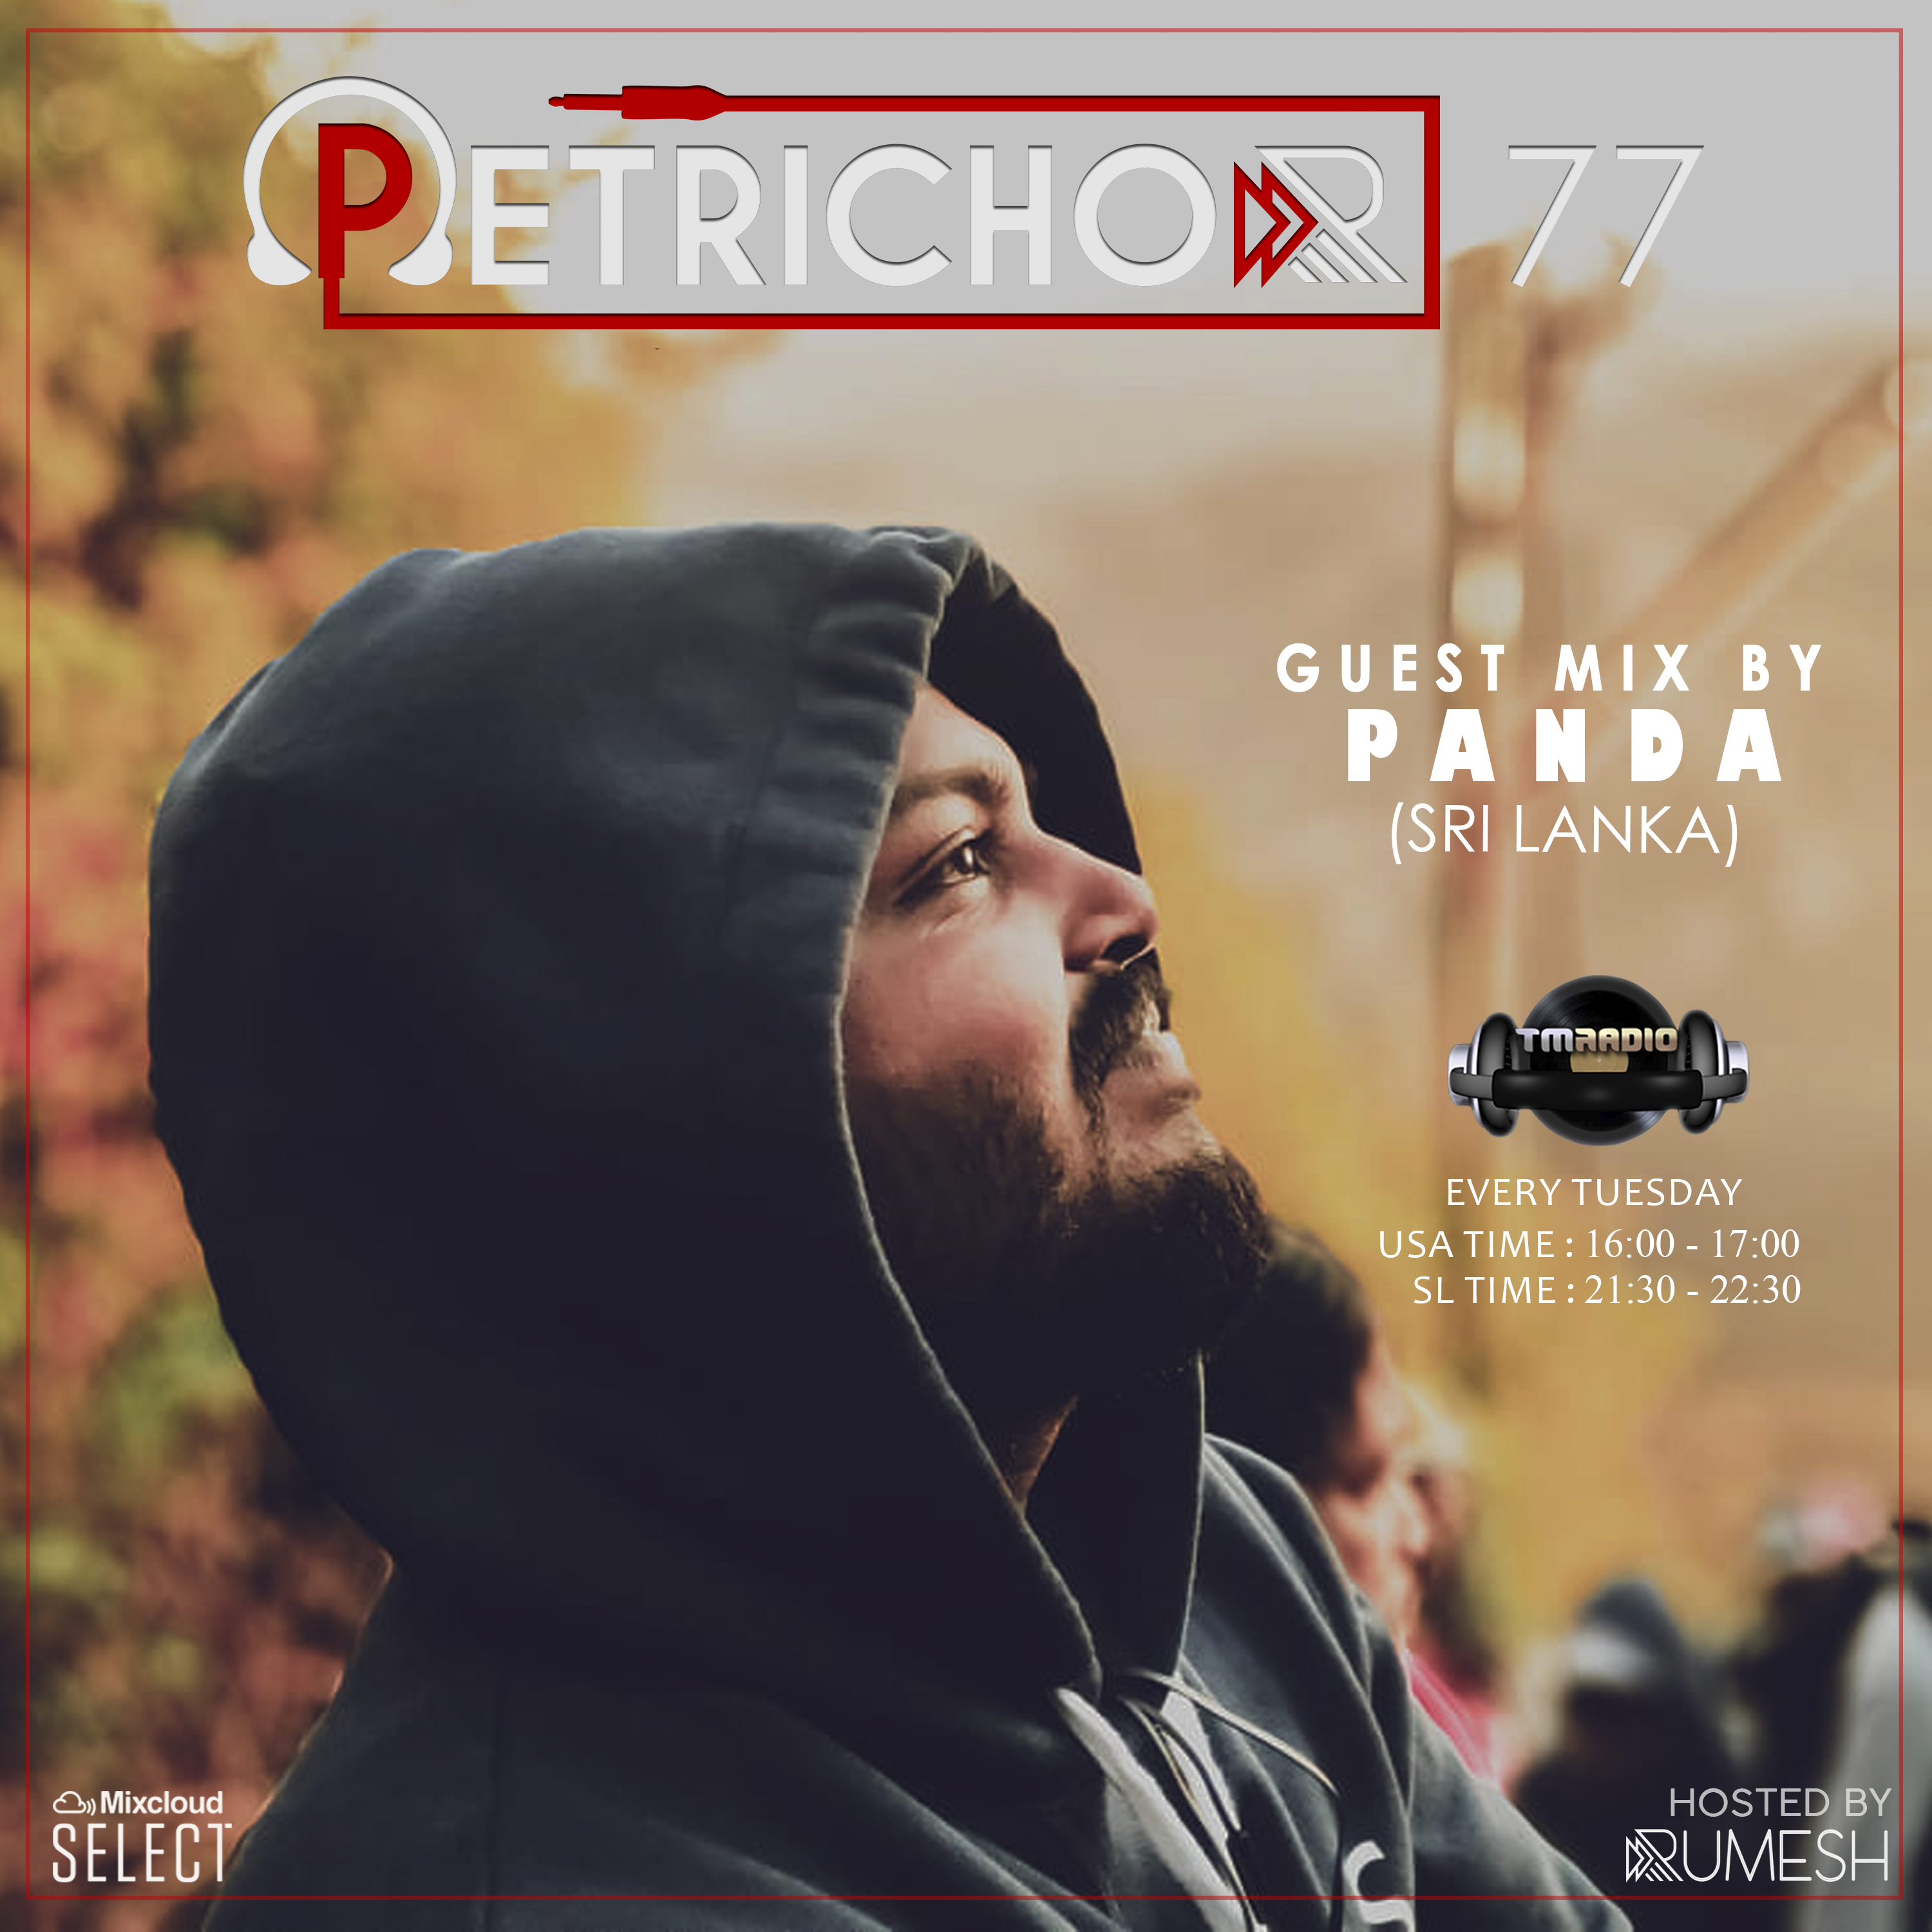 Petrichor :: Petrichor 77 Guest Mix by P A N D A (Sri Lanka) (from April 21st) (aired on April 28th, 2020) banner logo